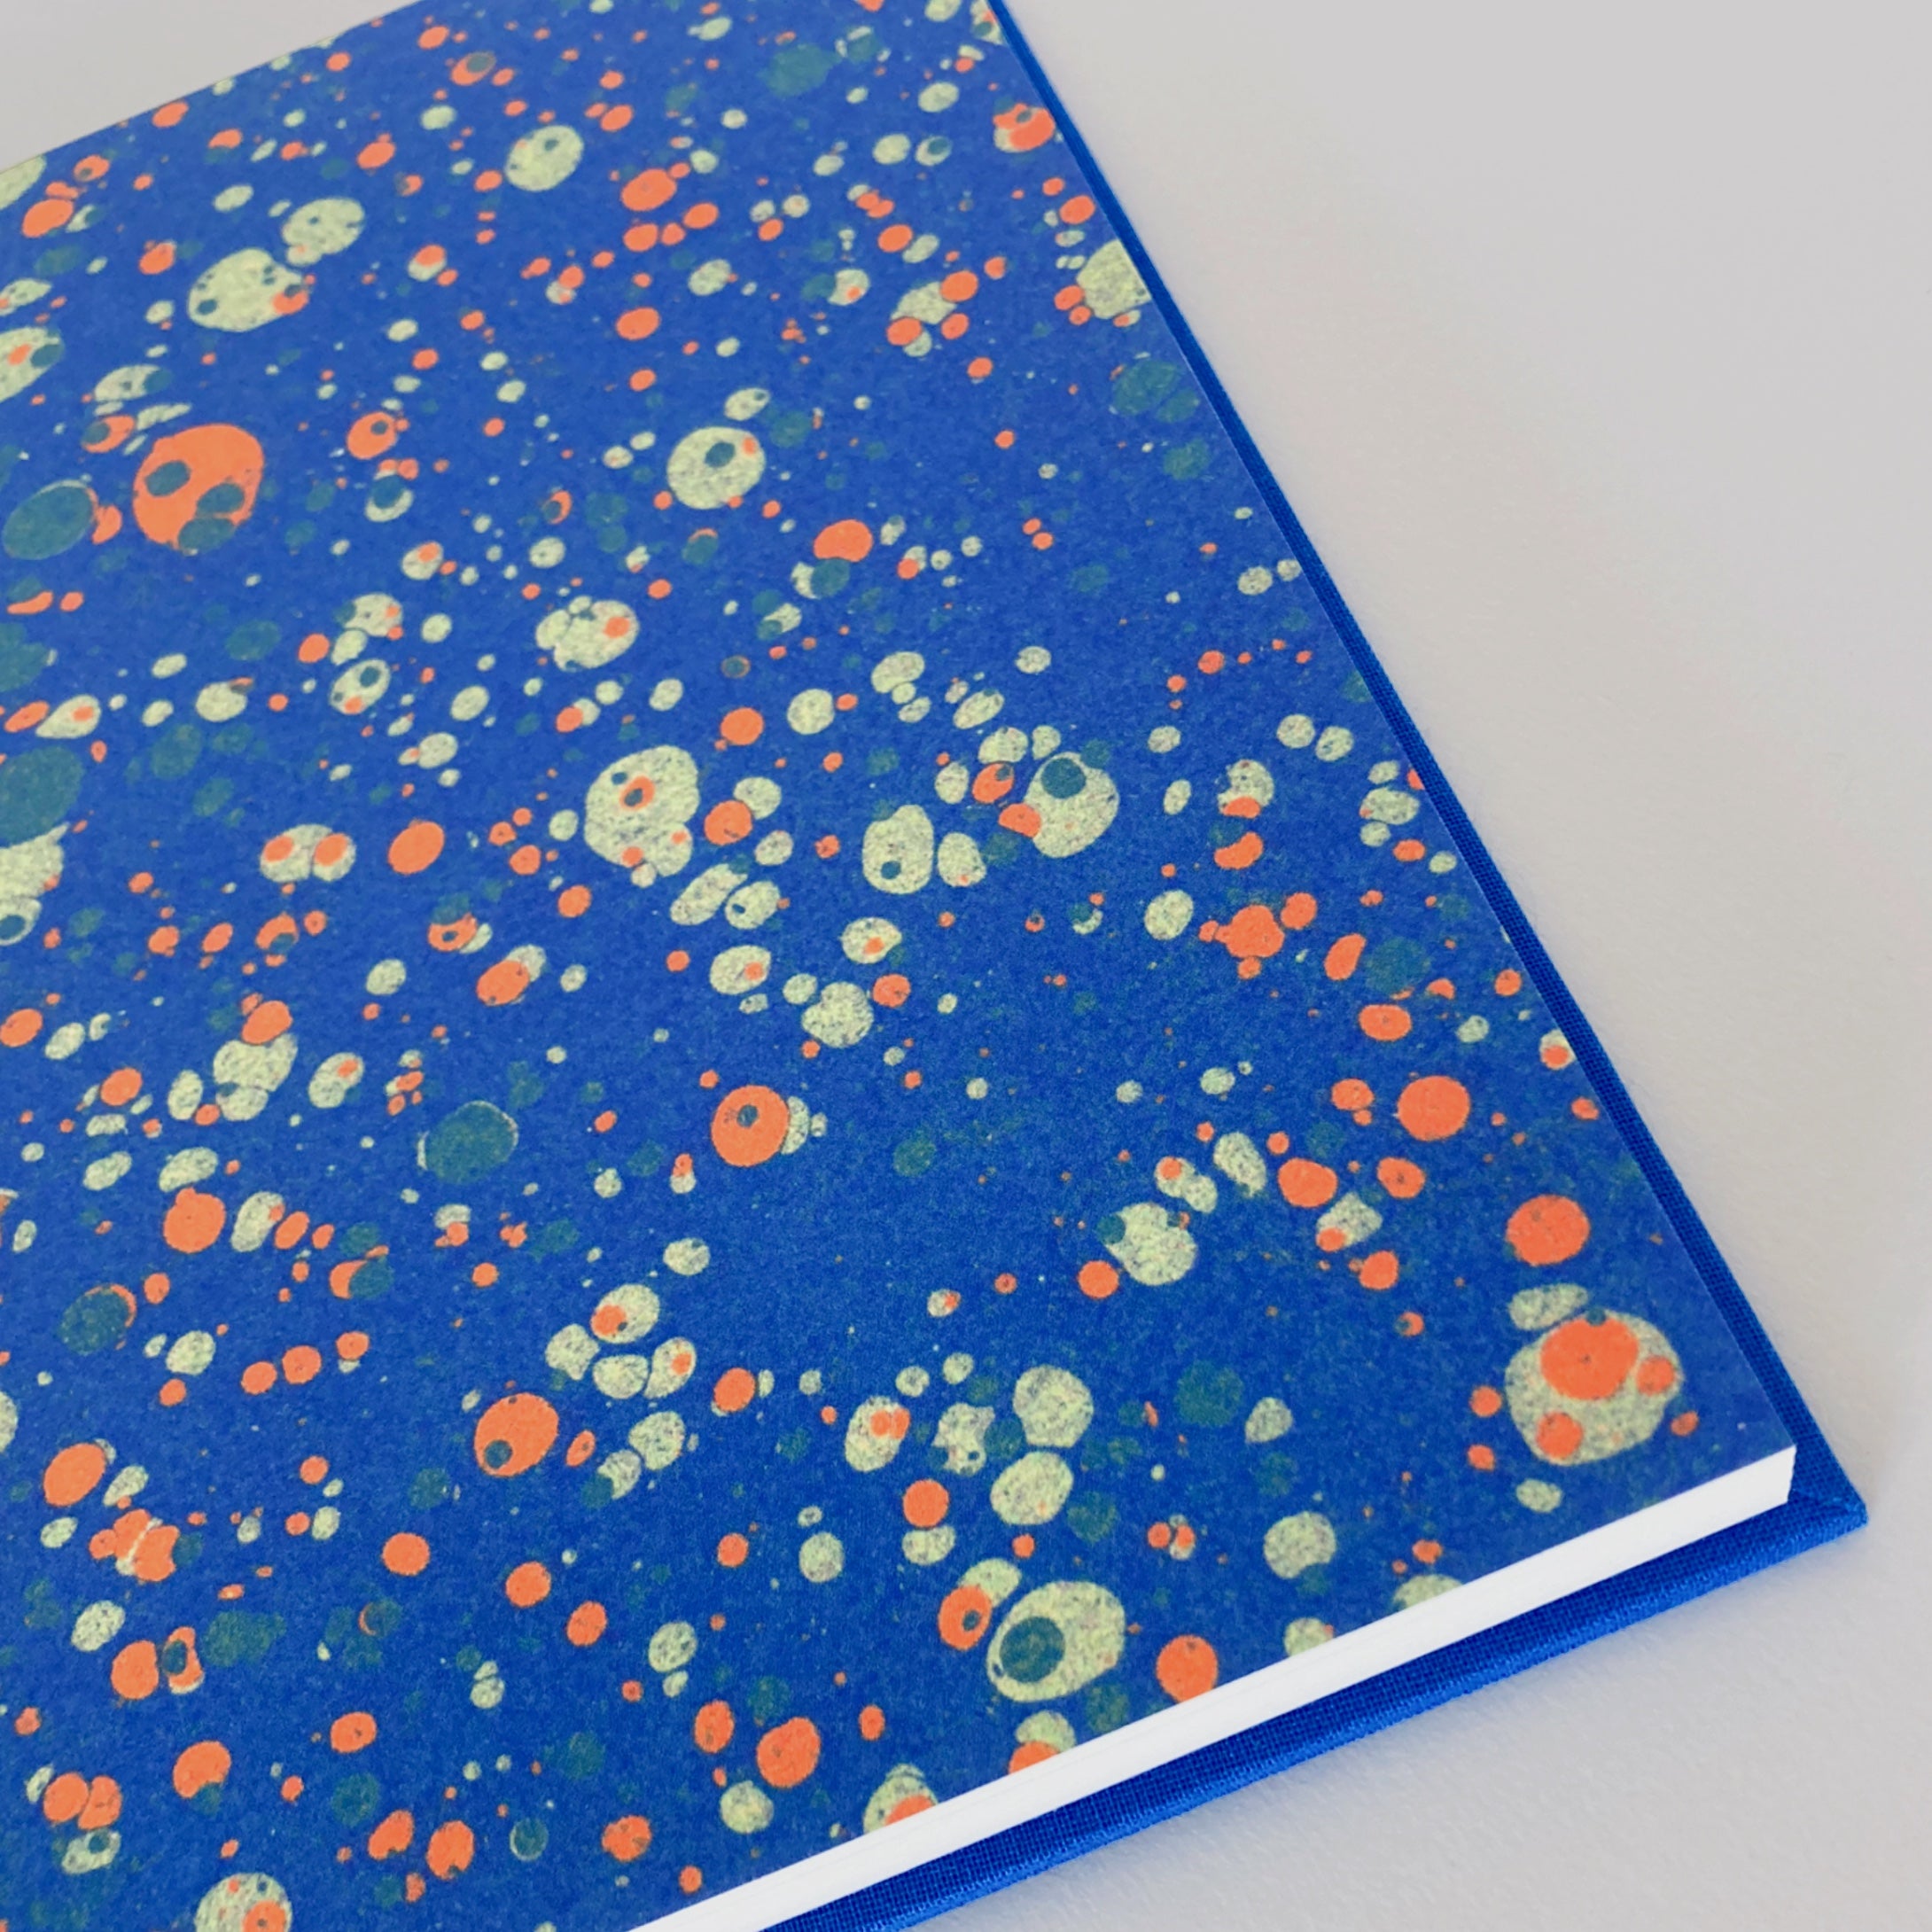 Blue, mint and orange marble end pages.